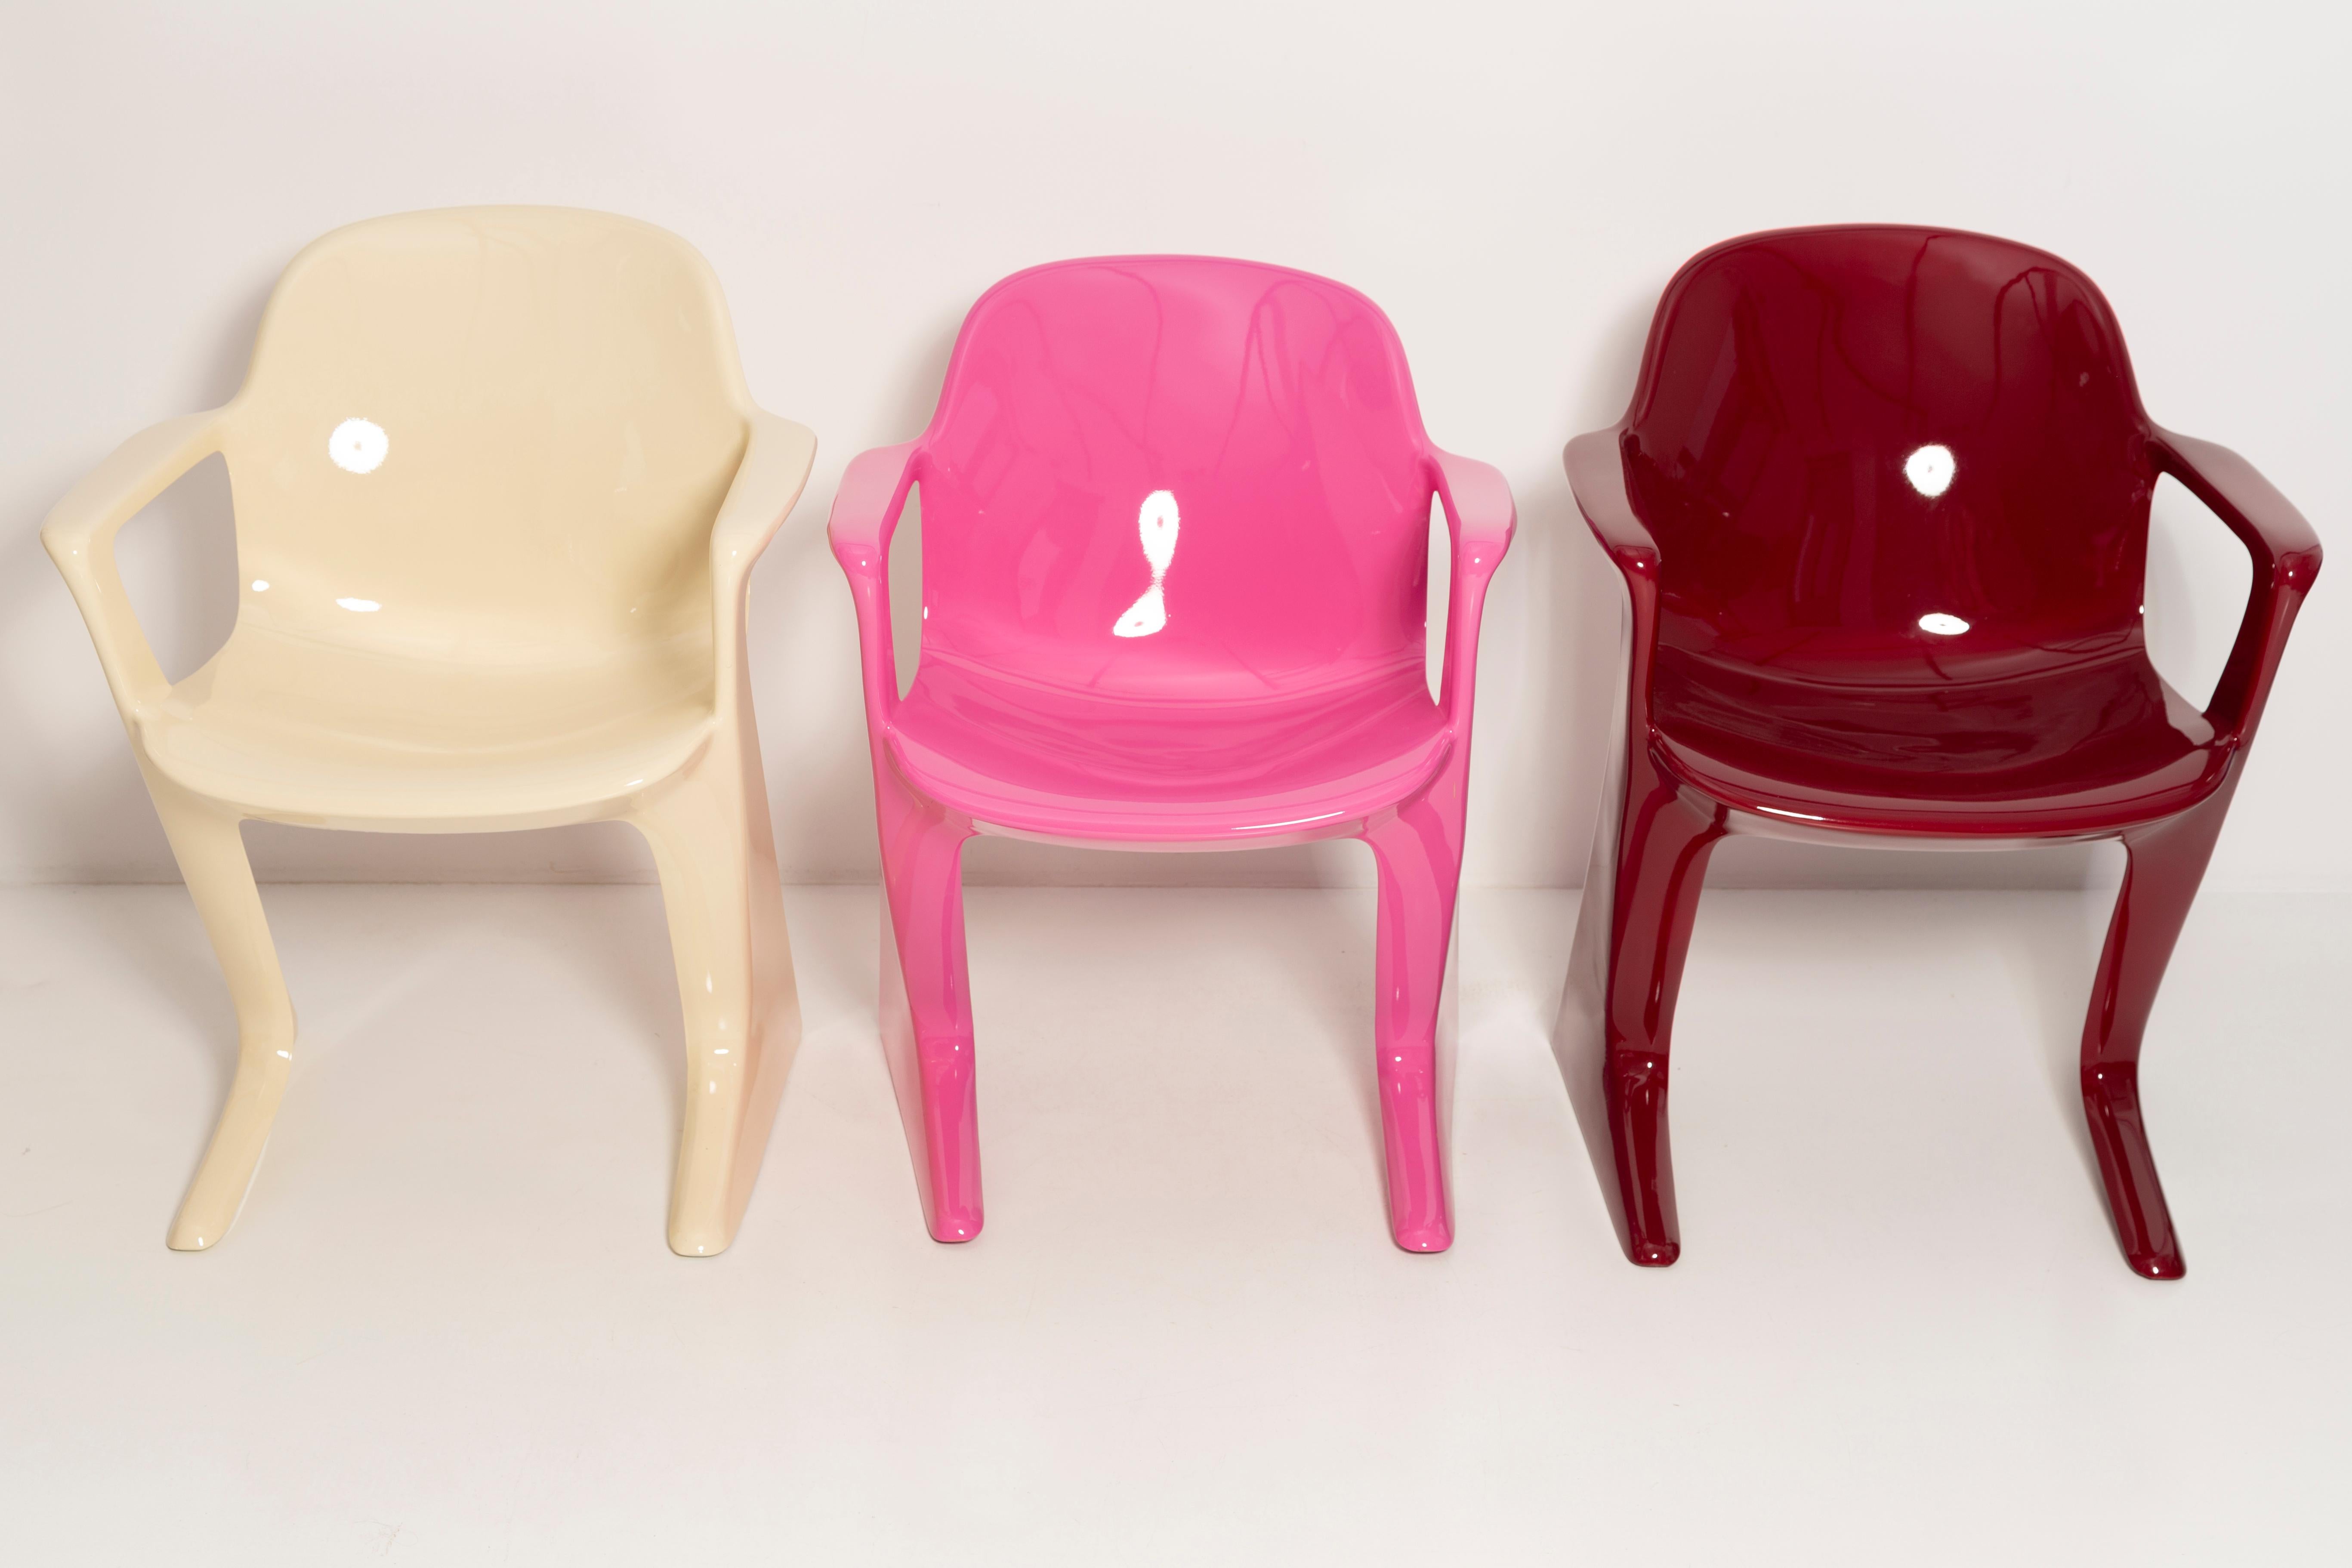 20th Century Four Mid-Century Pink Beige Red Kangaroo Chairs, Ernst Moeckl, Germany, 1960s For Sale